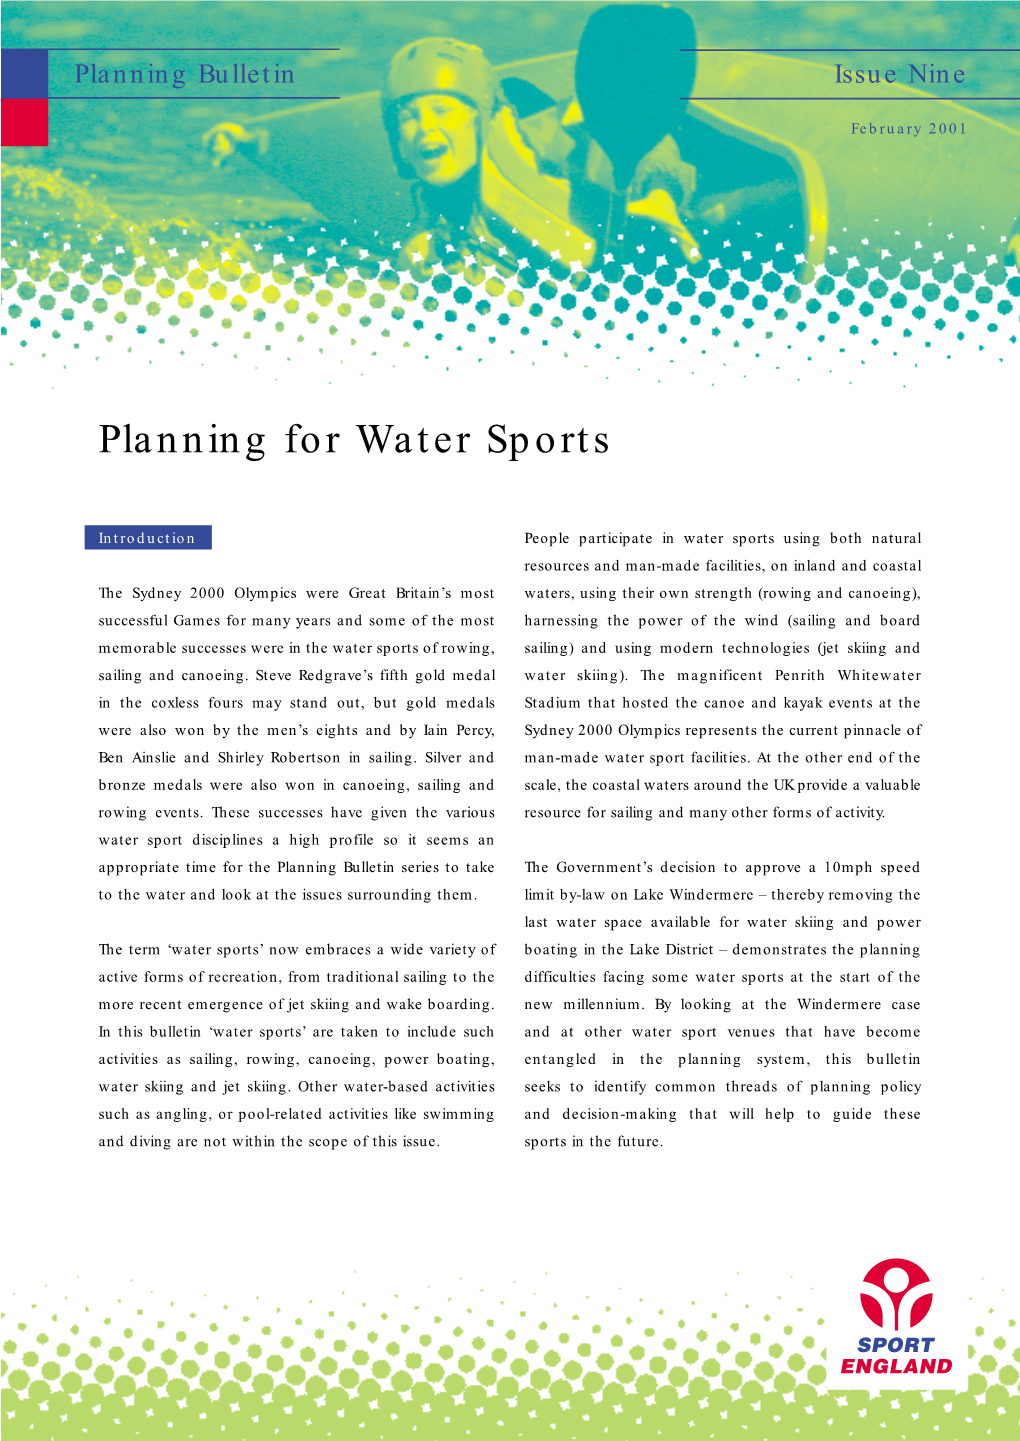 Planning Bulletin 9: Planning for Water Sports